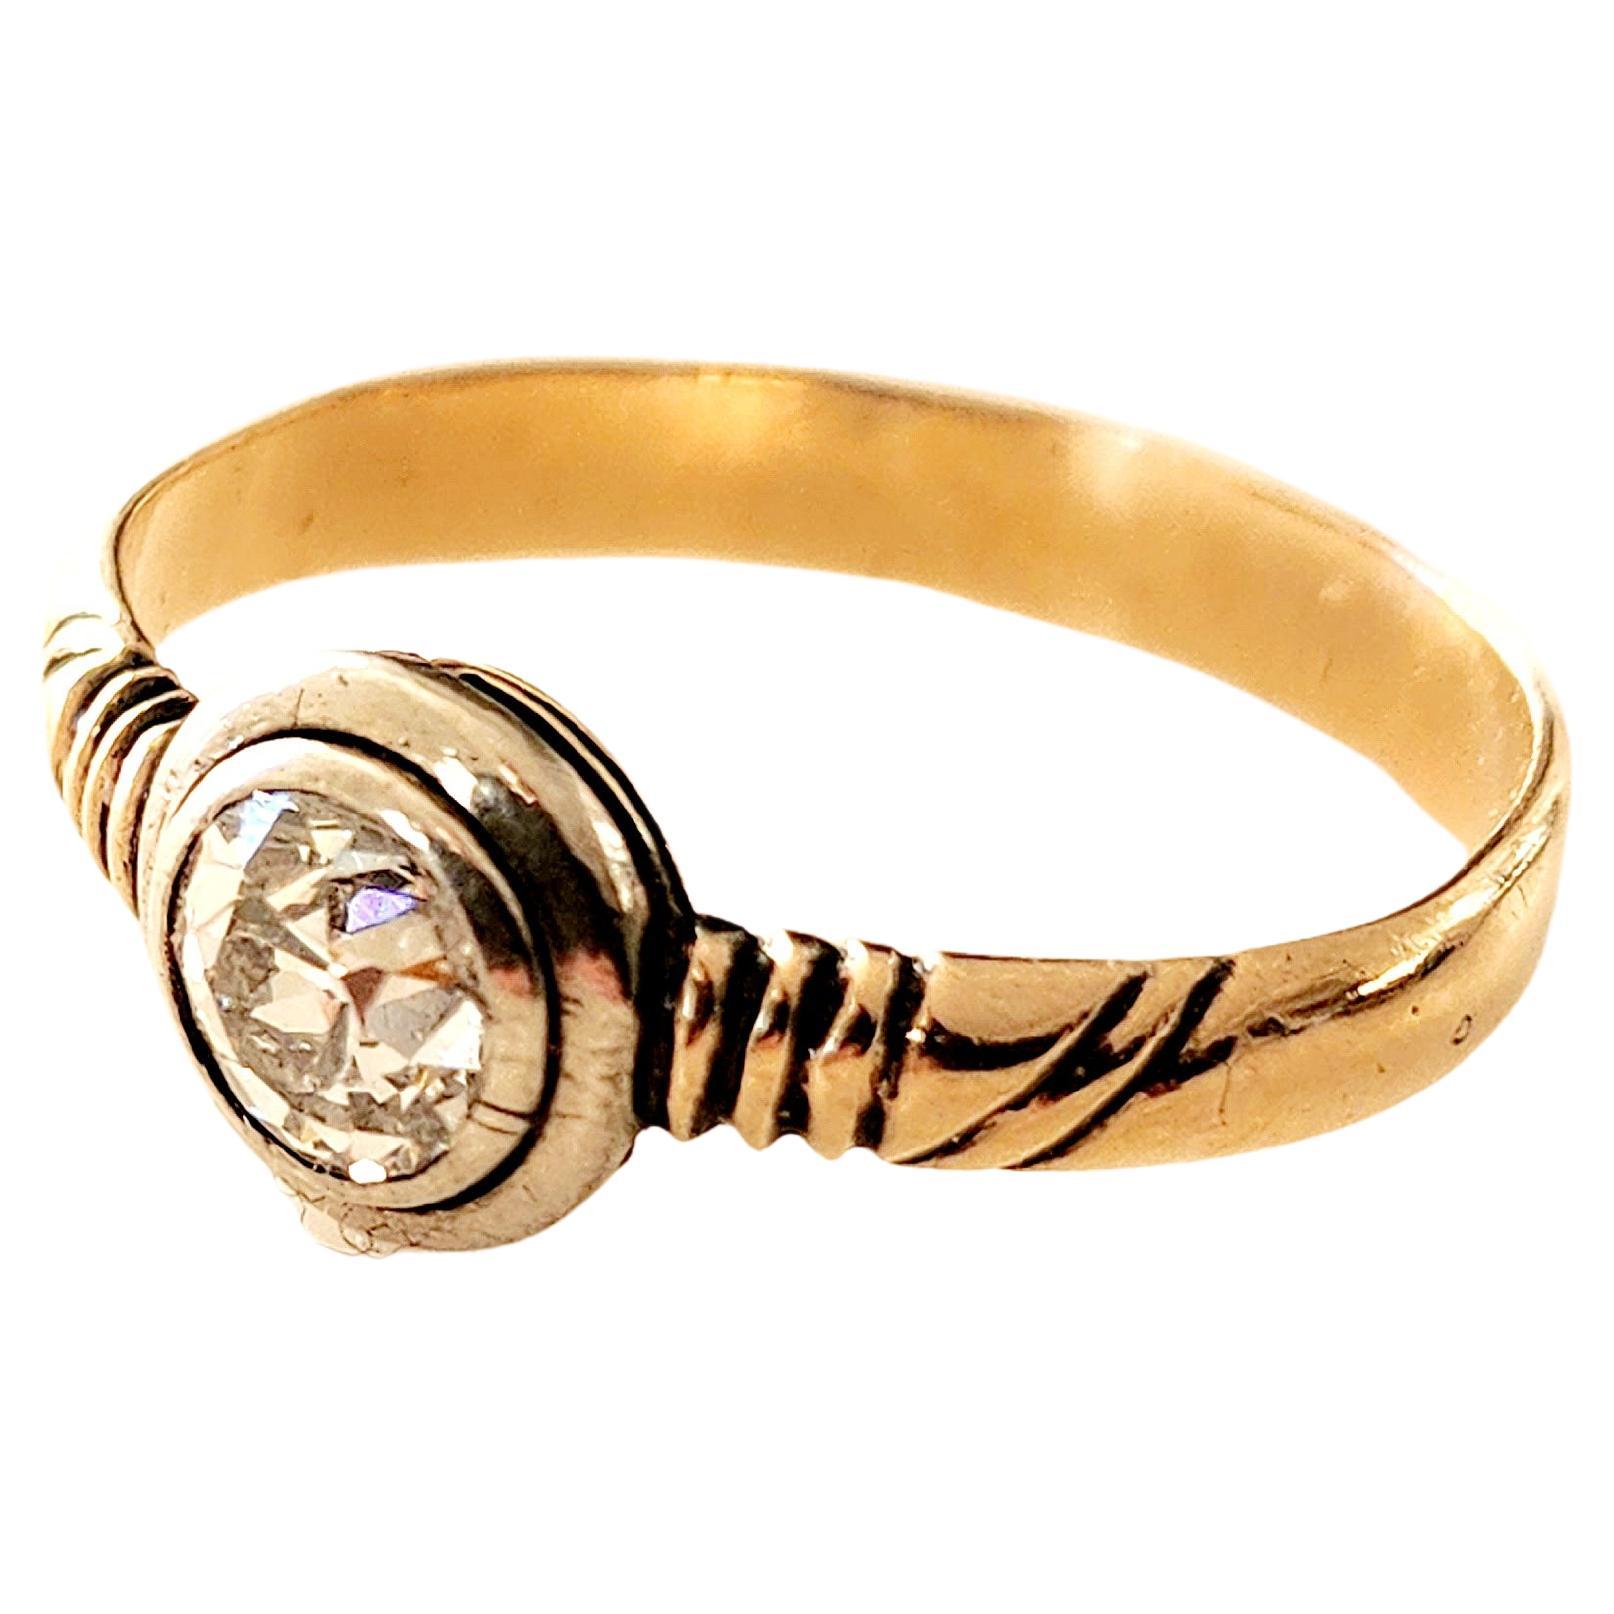 Antique old mine cut diamond solitair ring centered with 1 old mine cut diamond with estimate weight of 0.65 ct in 14k gold setting hall marked 56 imperial russian gold standard and later with 583 soviet control mark